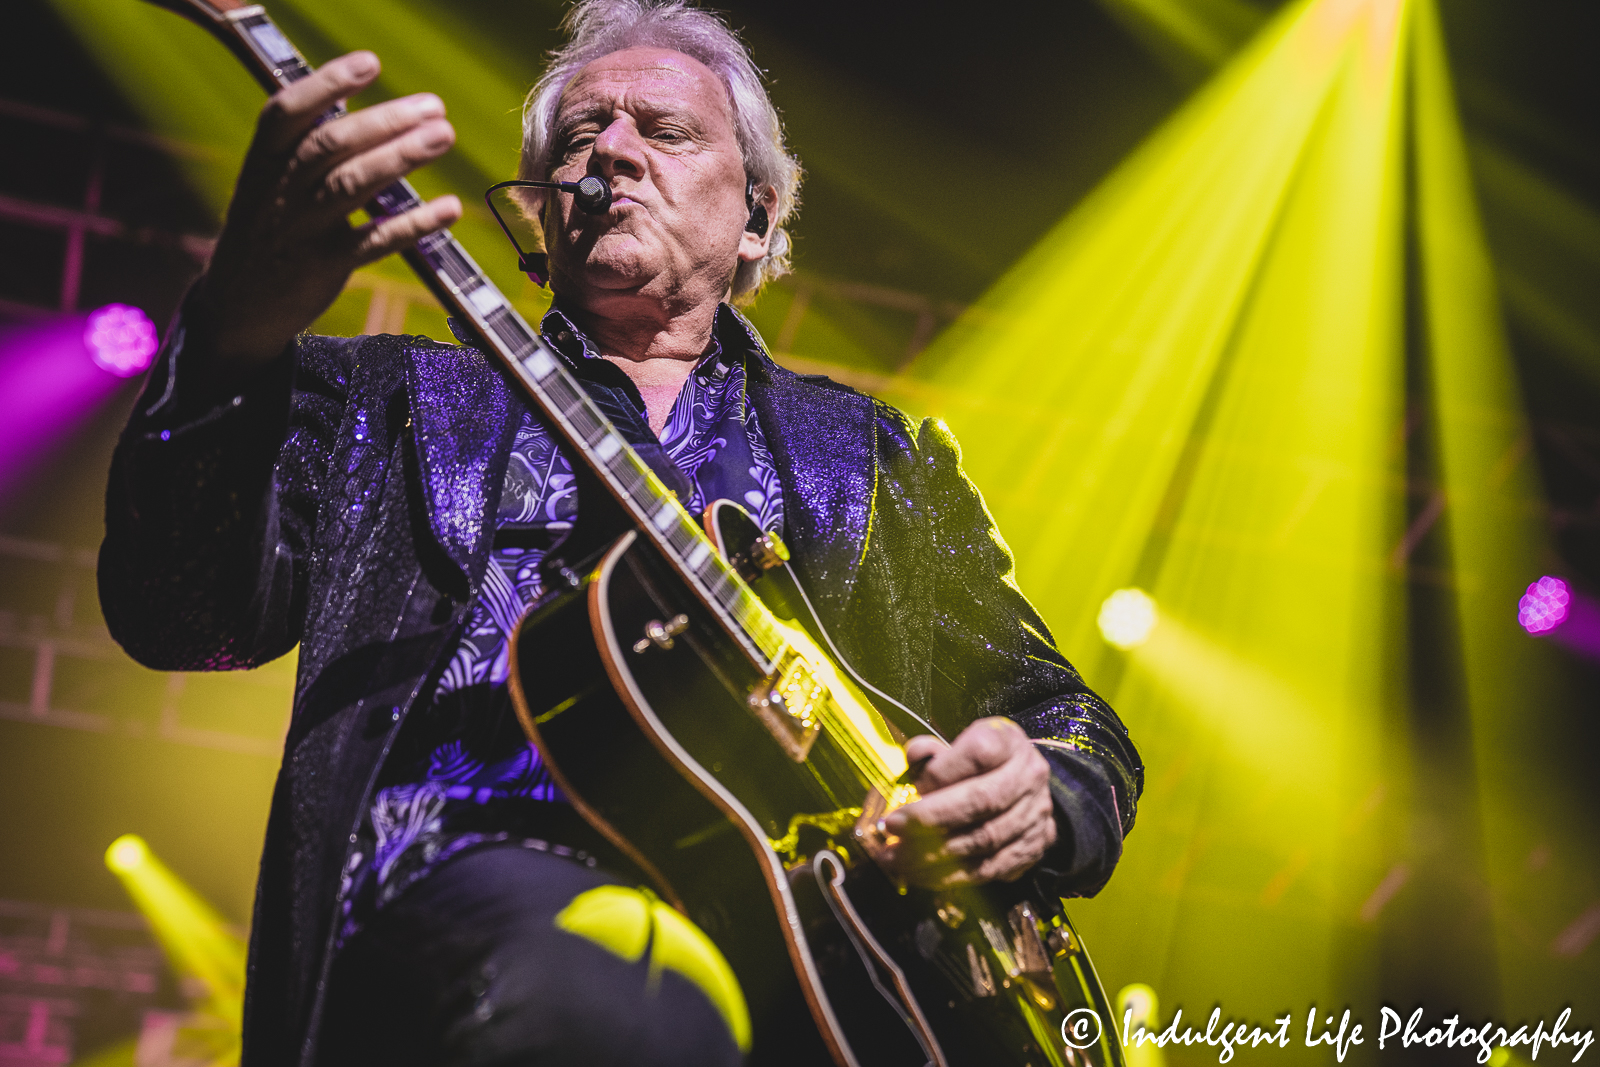 Guitar player and singer Russell Hitchcock of soft rock duo Air Supply singing "Even the Nights Are Better" in concert at Ameristar Casino's Star Pavilion in Kansas City, MO on May 5, 2023.